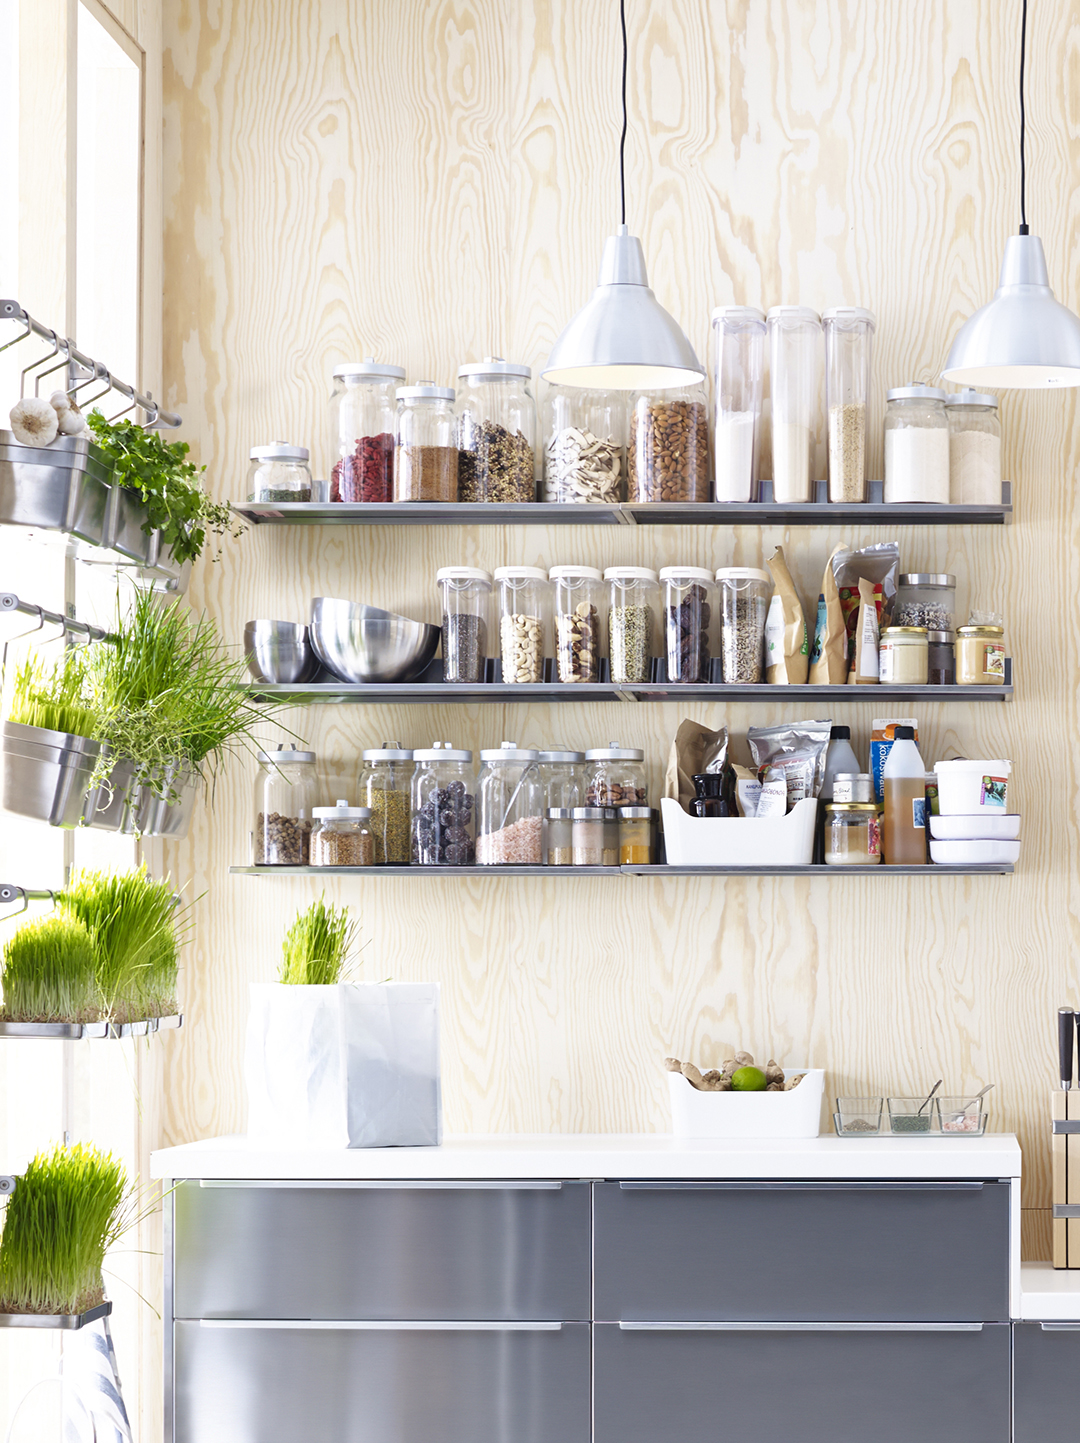 Store More in Your Small Kitchen with These Space-Saving Ideas